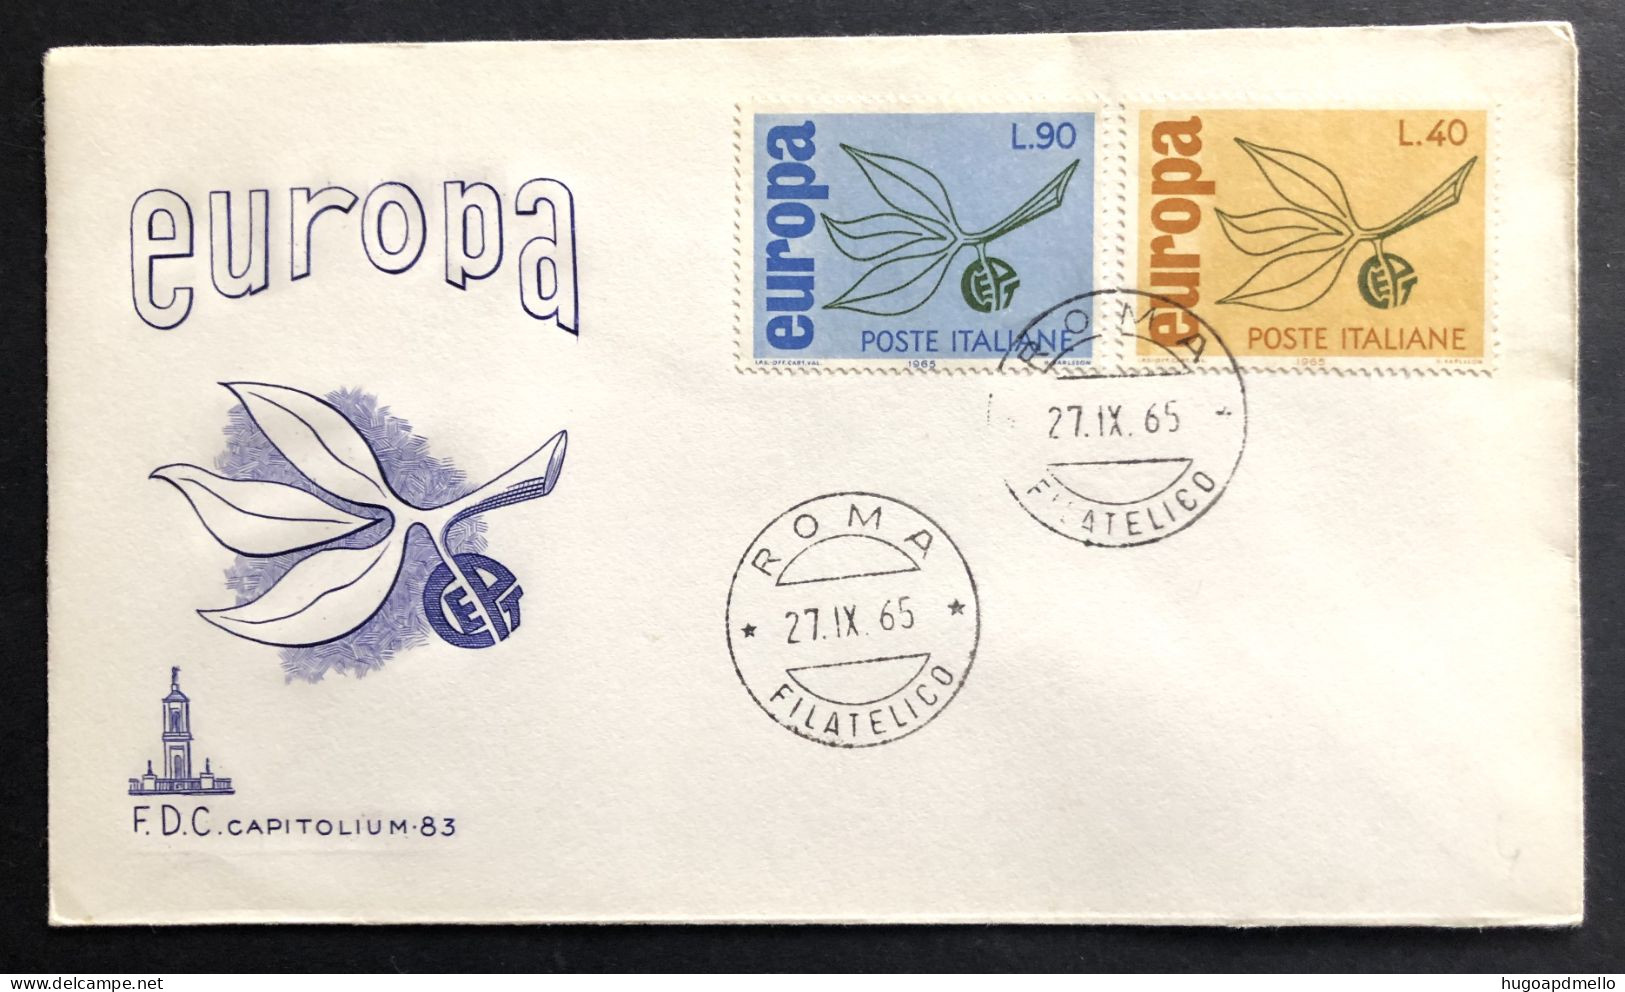 ITALY, Uncirculated FDC, « EUROPA CEPT », 1965 - 1965